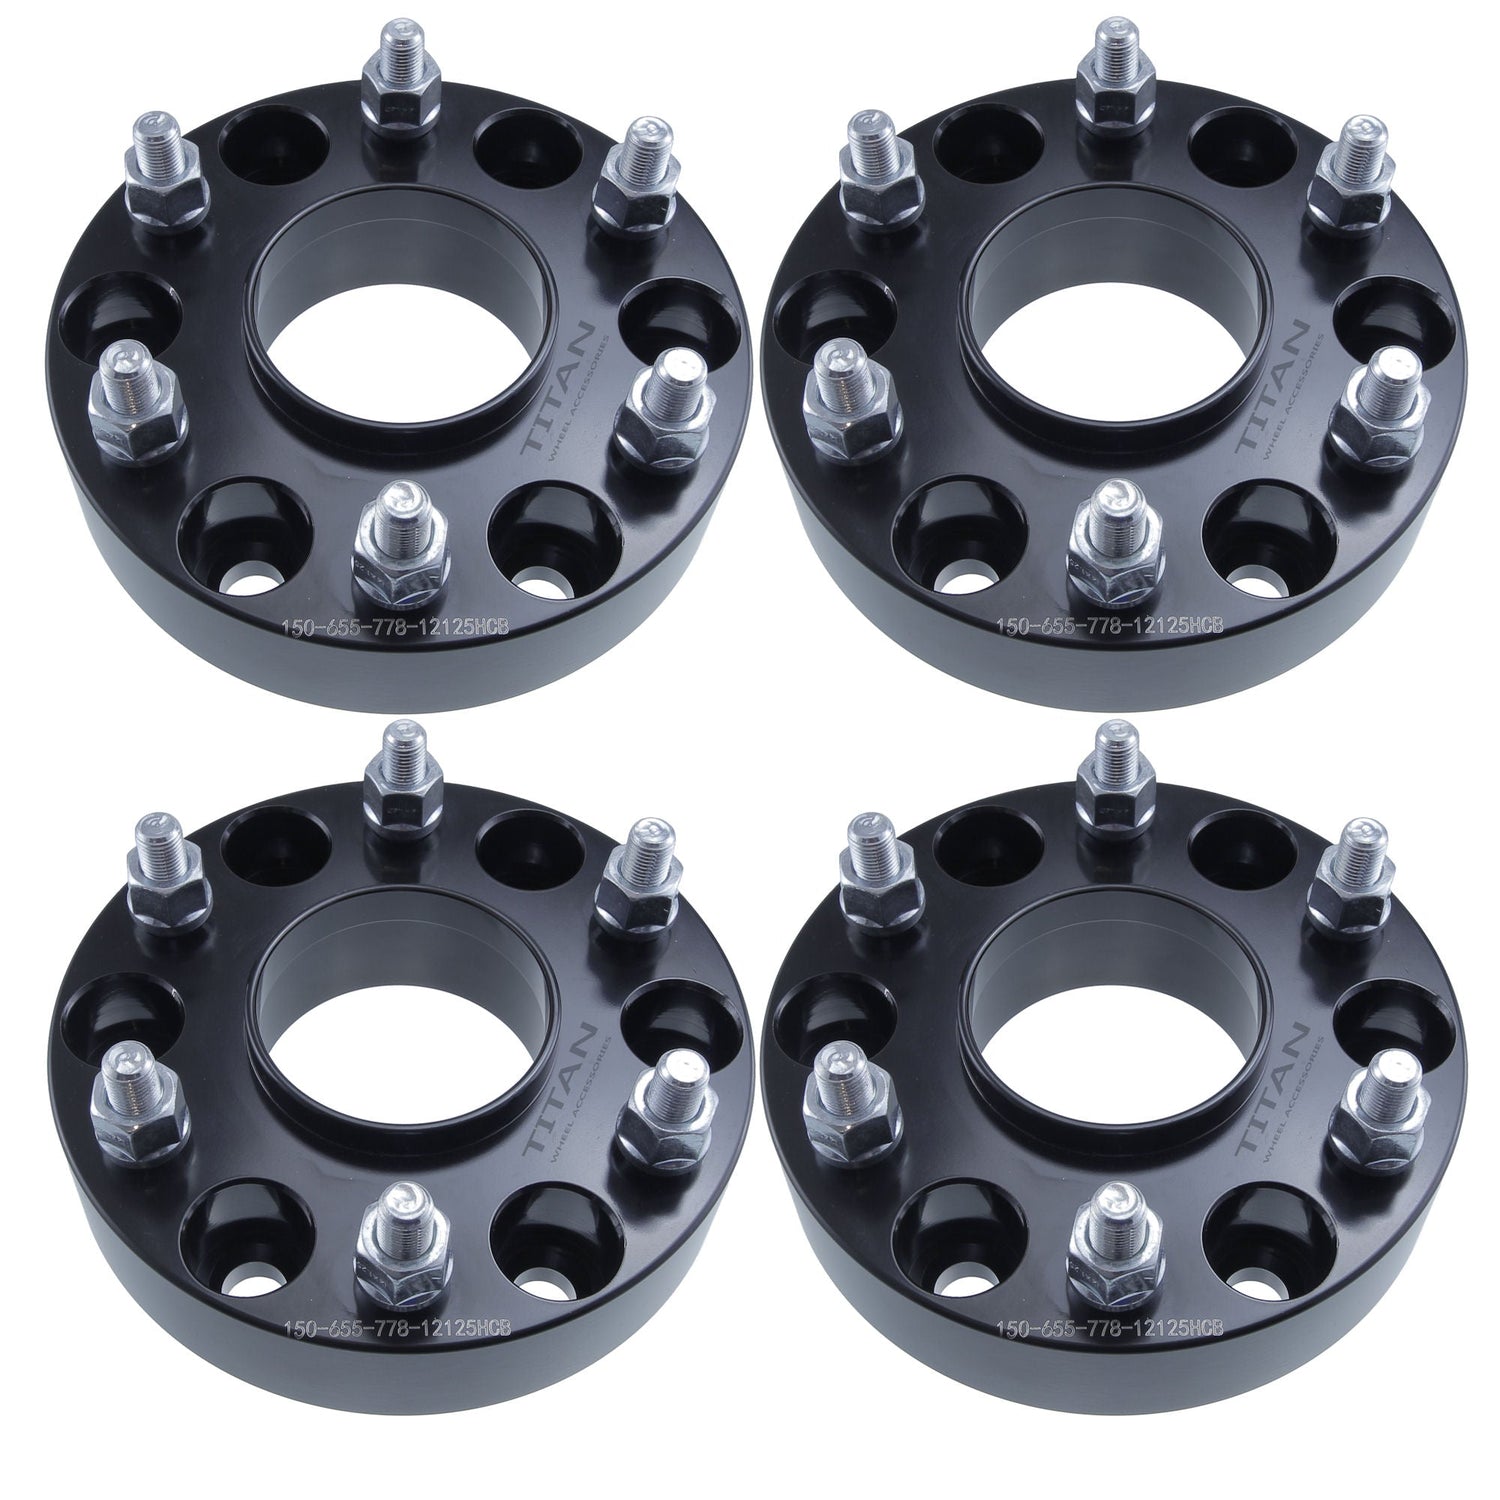 1.5 Inch Hubcentric Wheel Spacers for Titan XD Ram 1500, 6x139.7